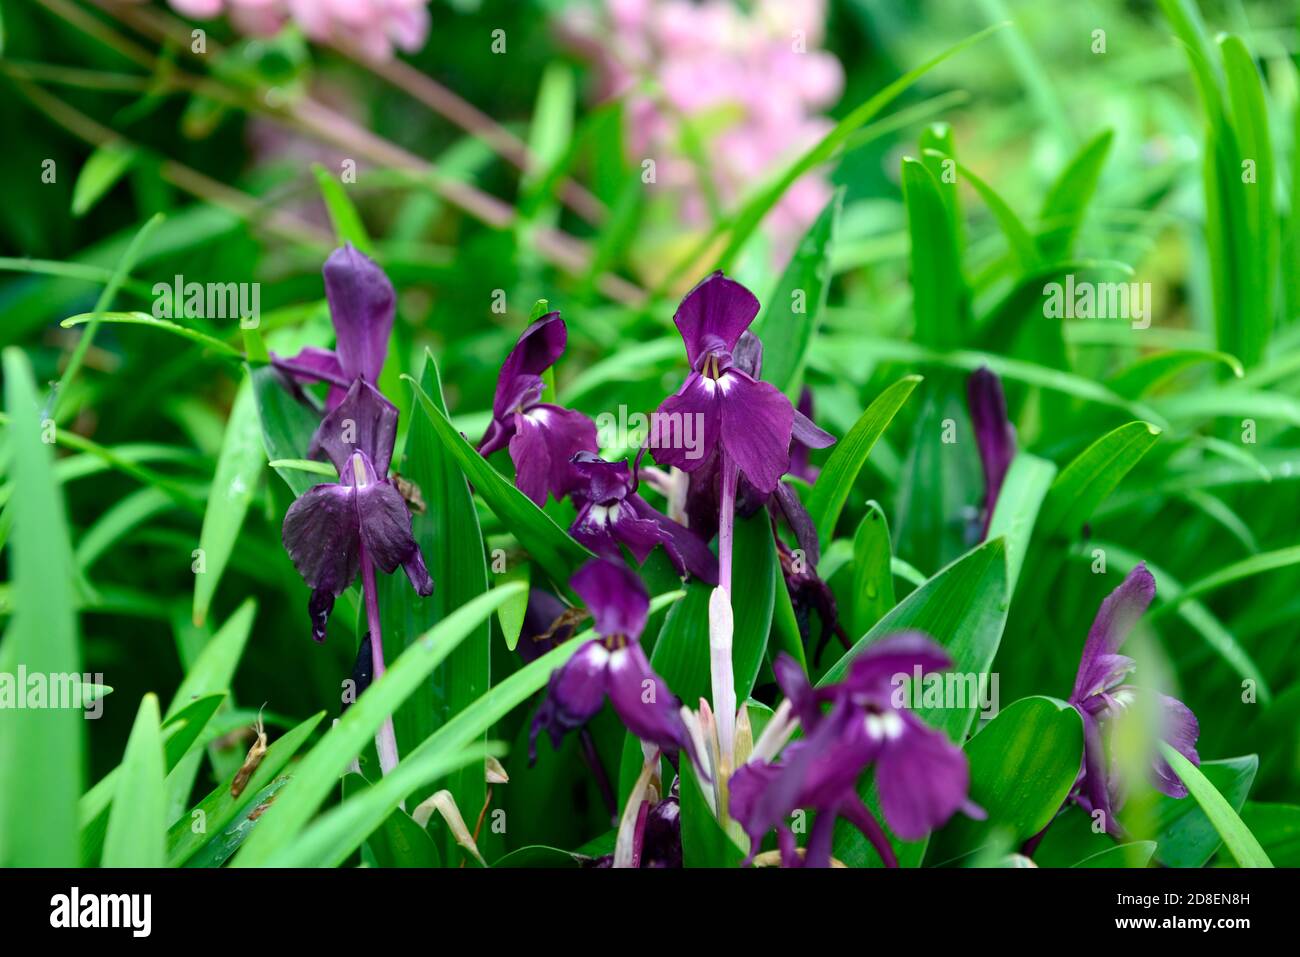 roscoea cautleyoides,purple flowers,showy orchid-like flowers,hardy ginger,flowering,RM Floral Stock Photo